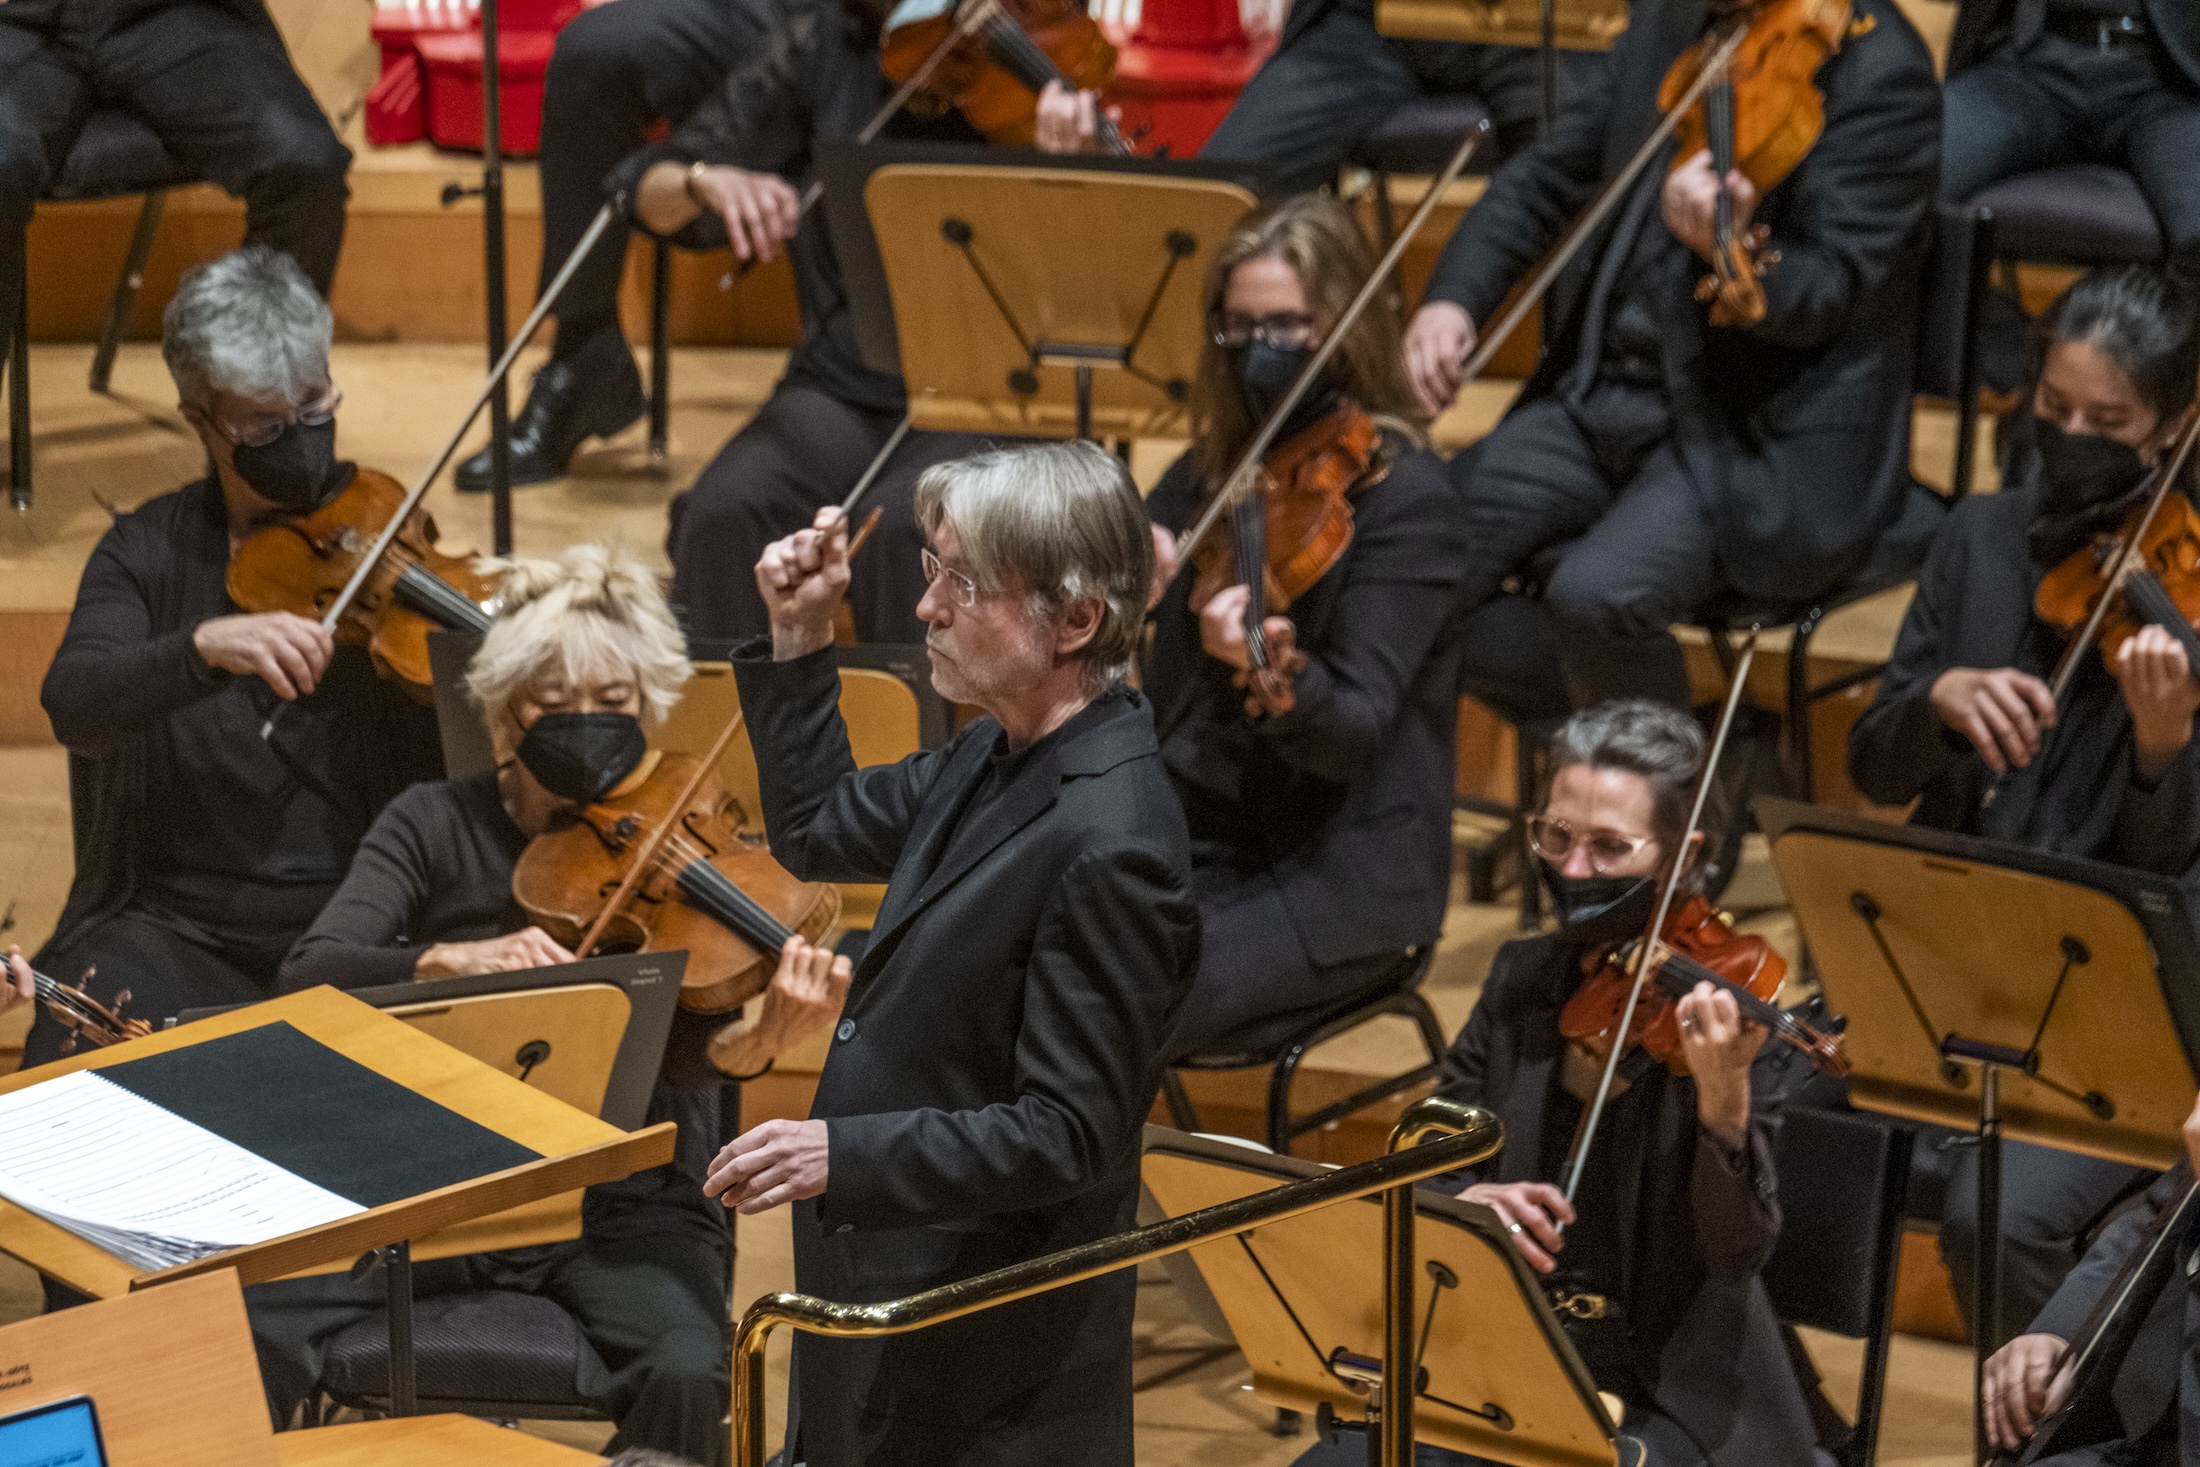 A conductor leads an orchestra of masked violinists, evoking a performance in a pandemic era.